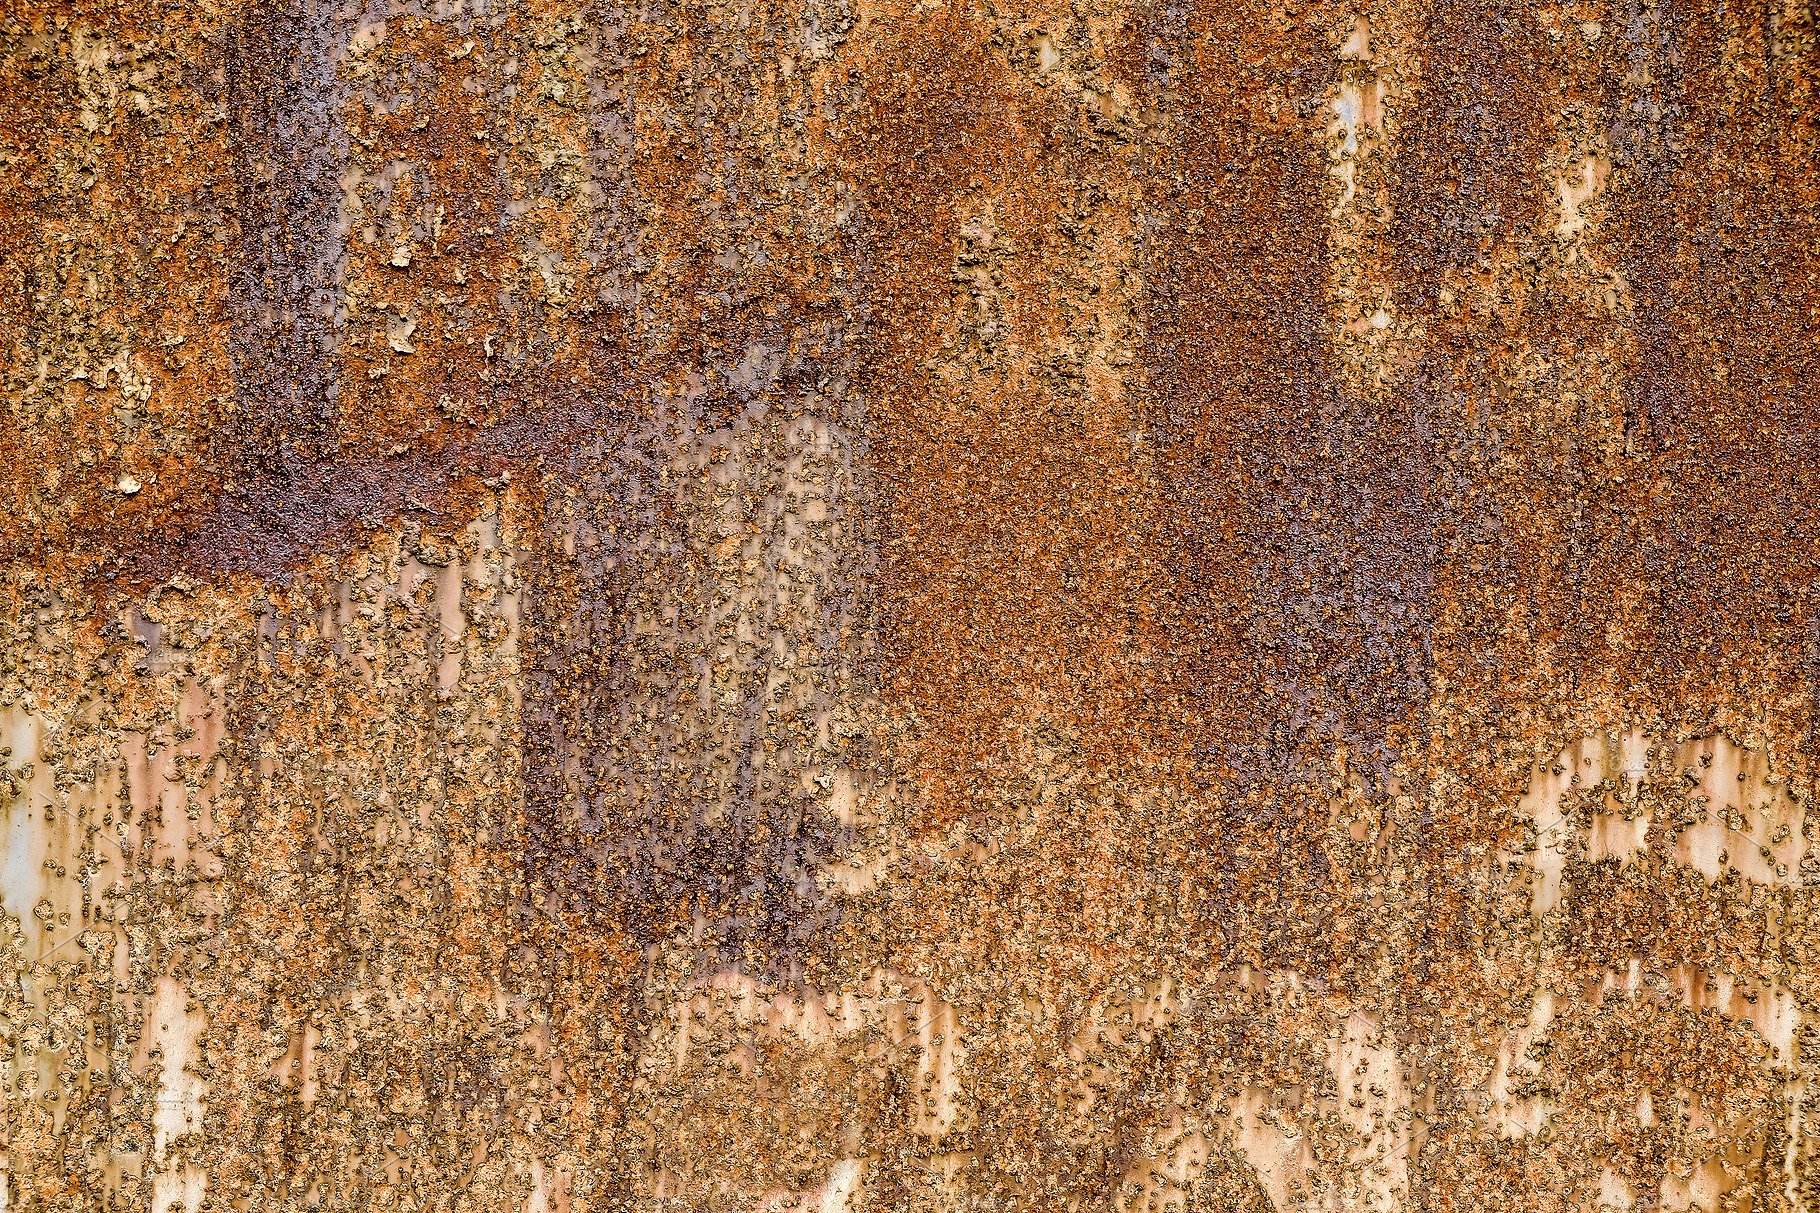 Rusted metal texture background ~ Photos ~ Creative Market